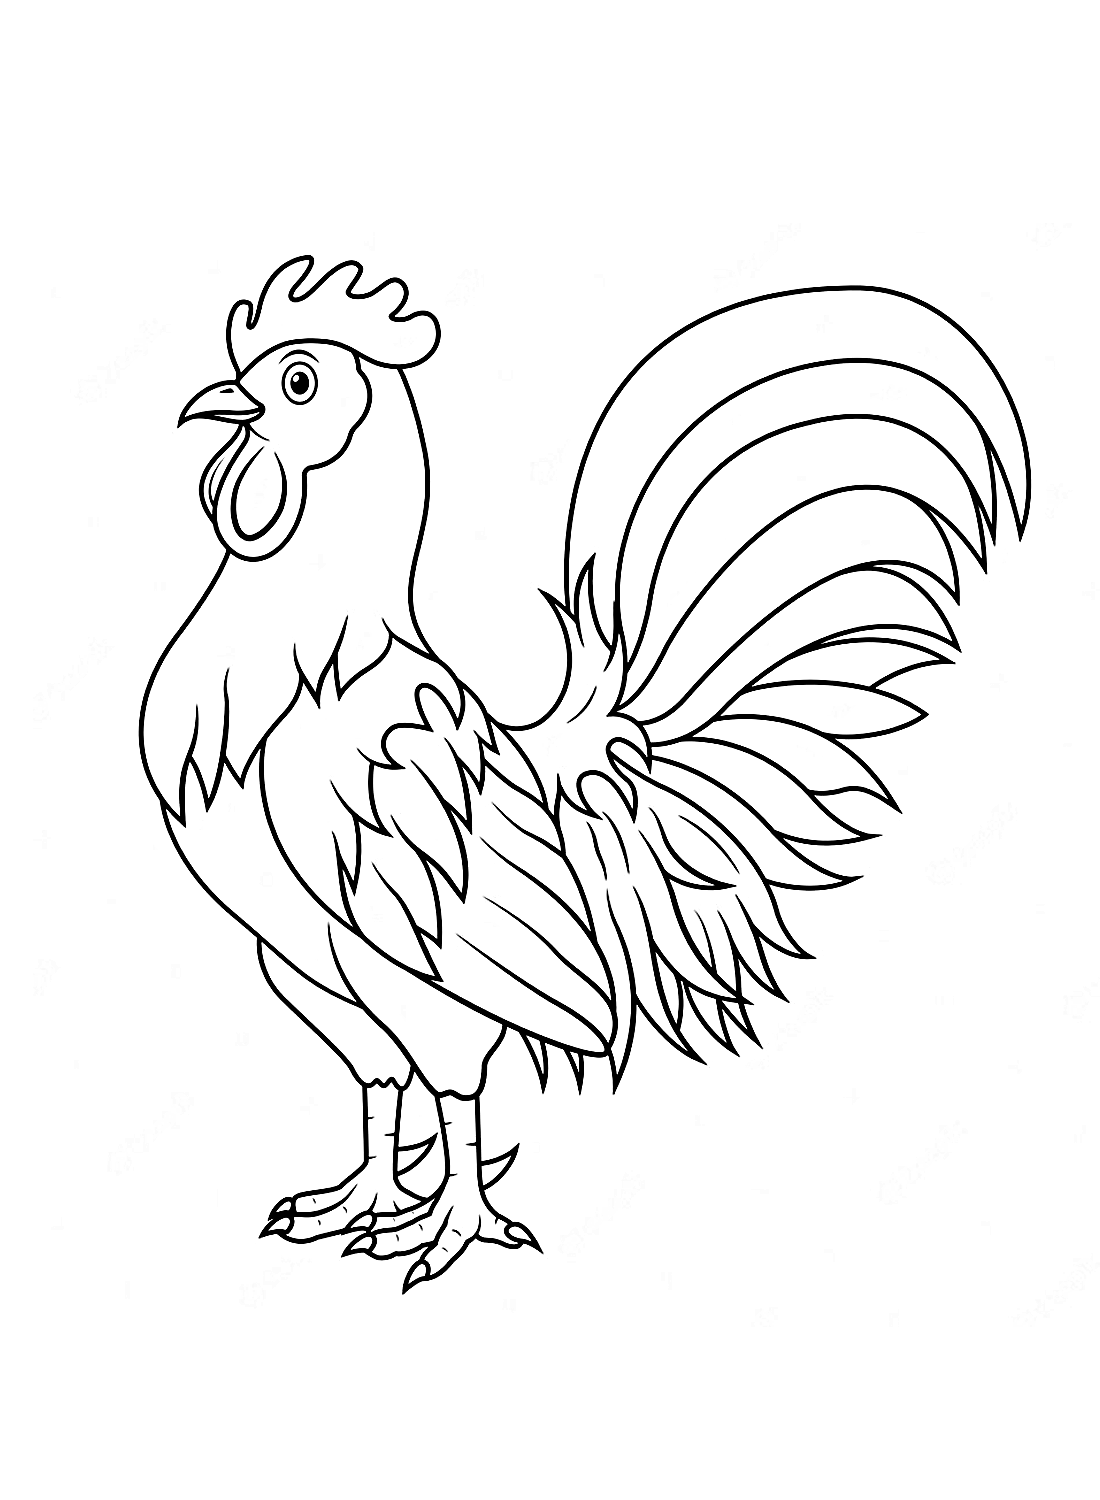 A tall rooster Coloring Pages